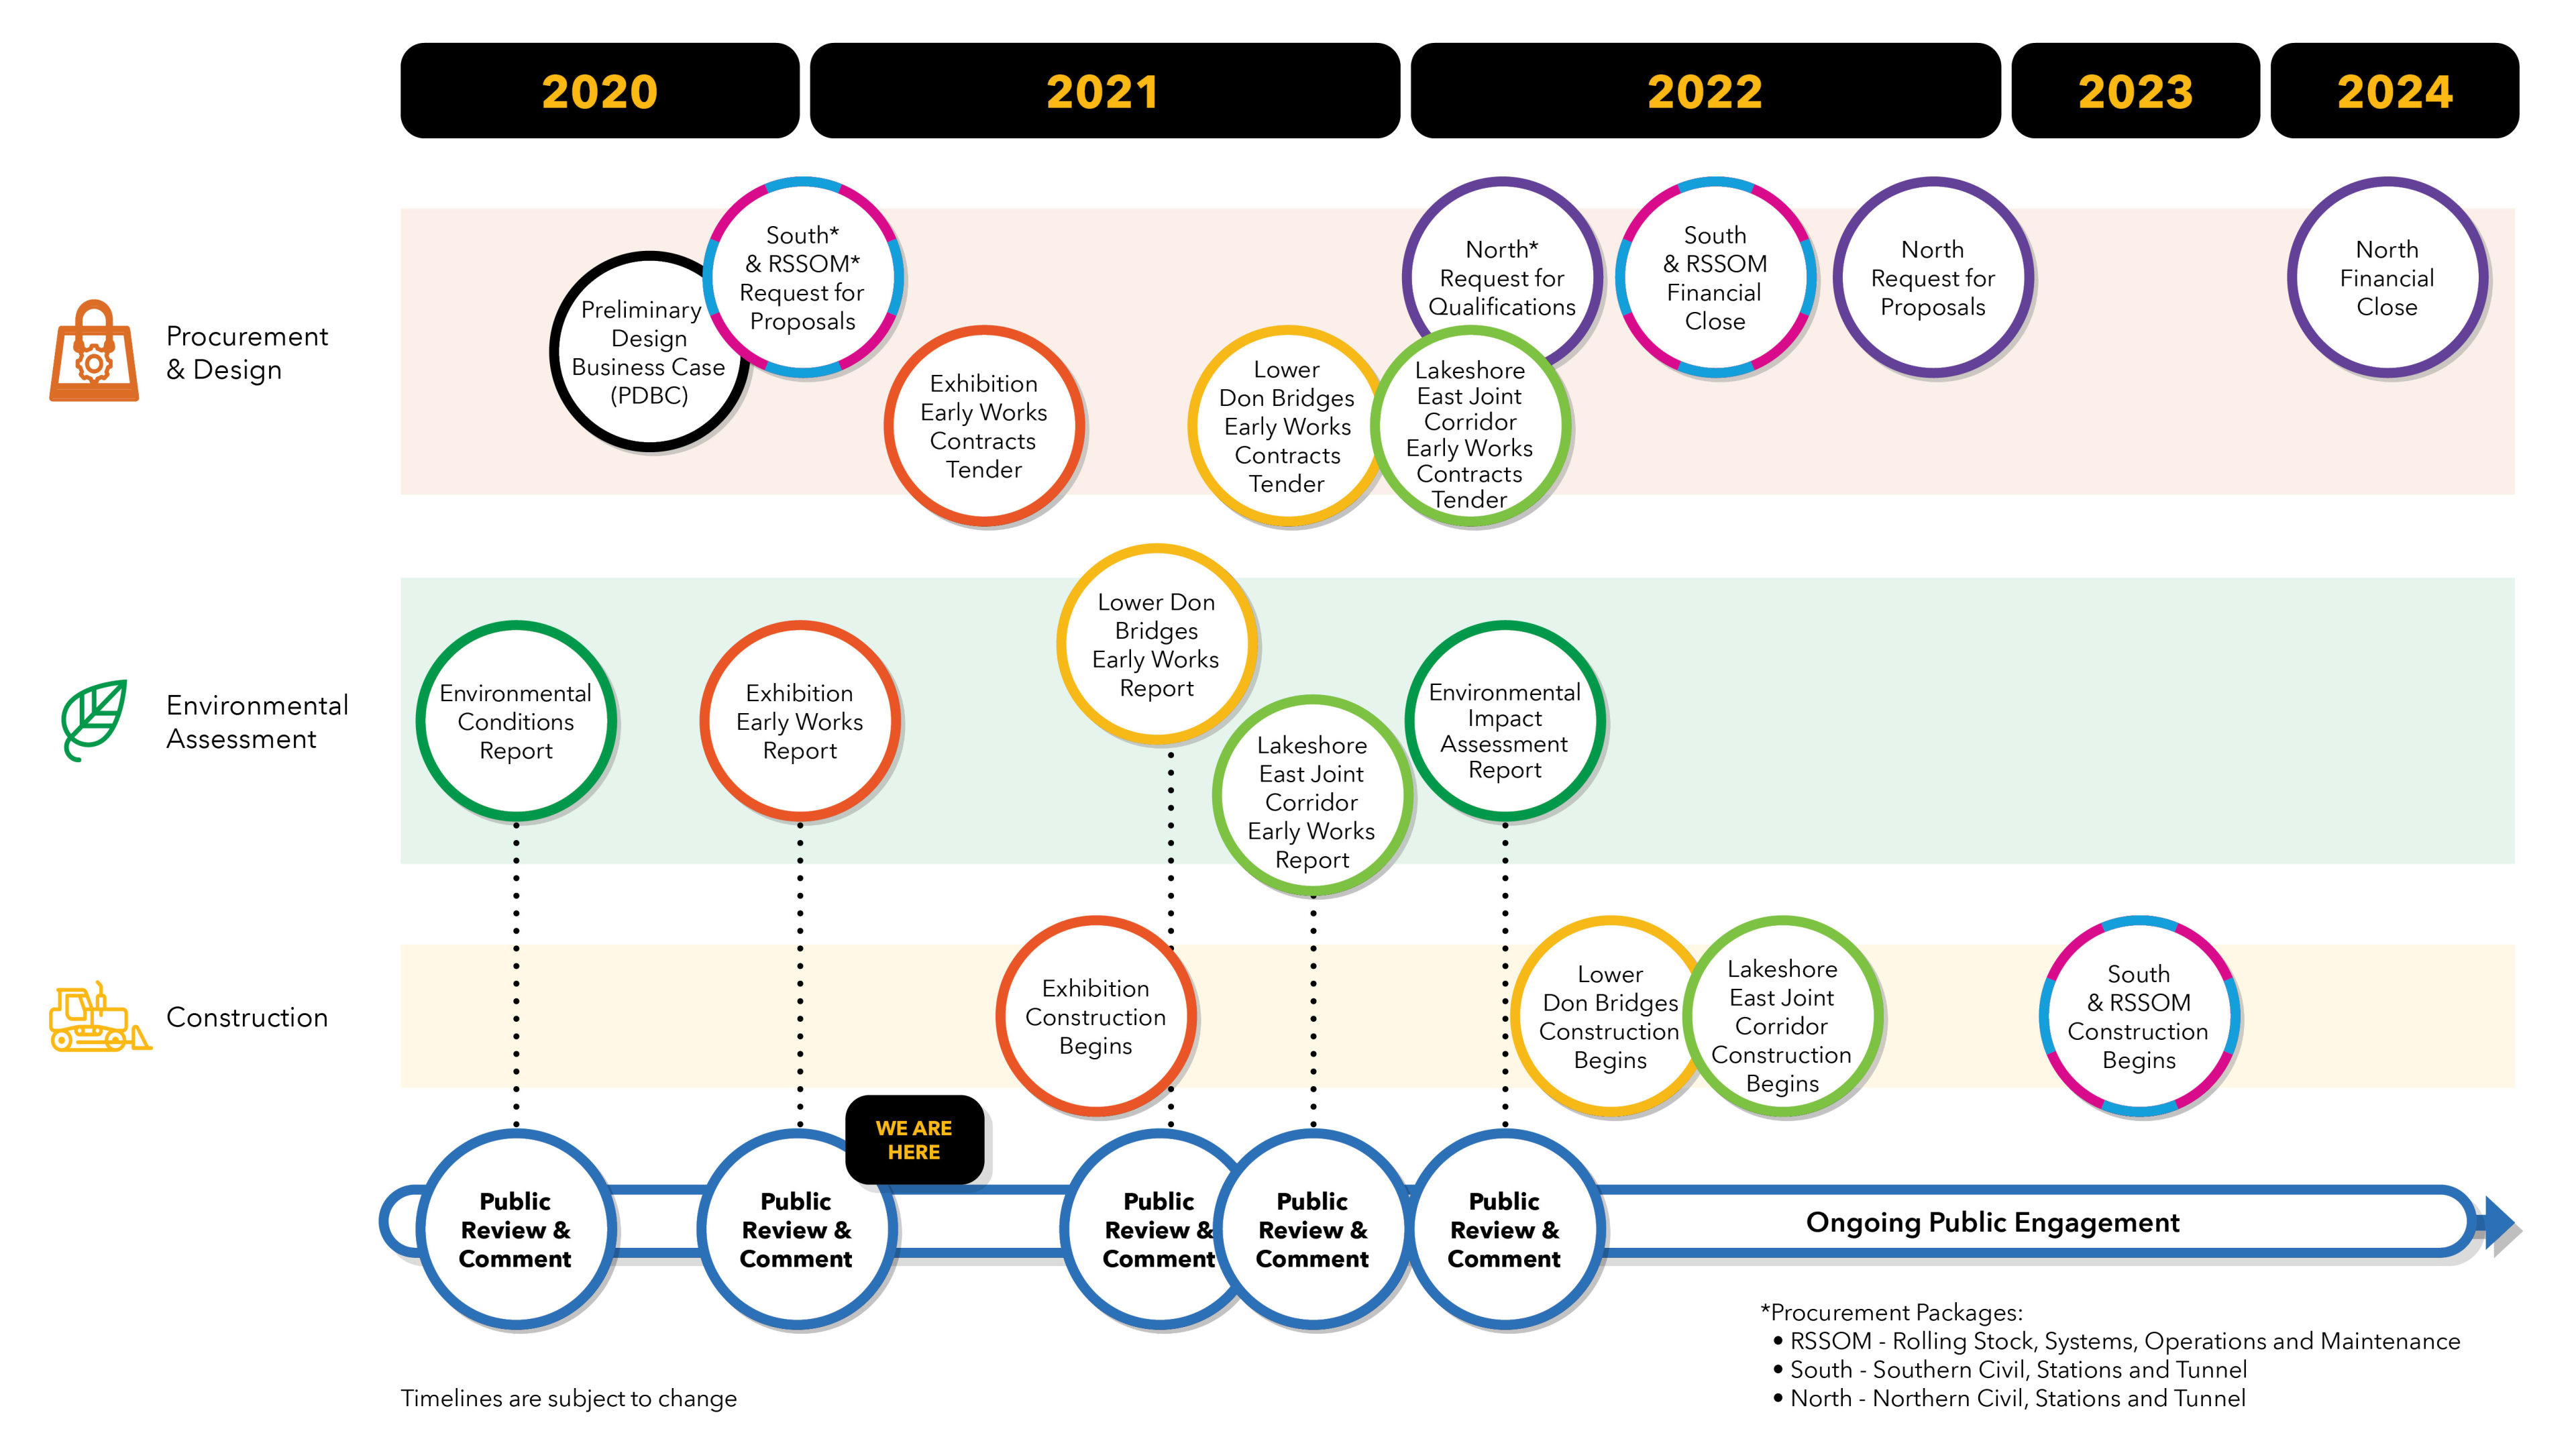 the timeline of the project.